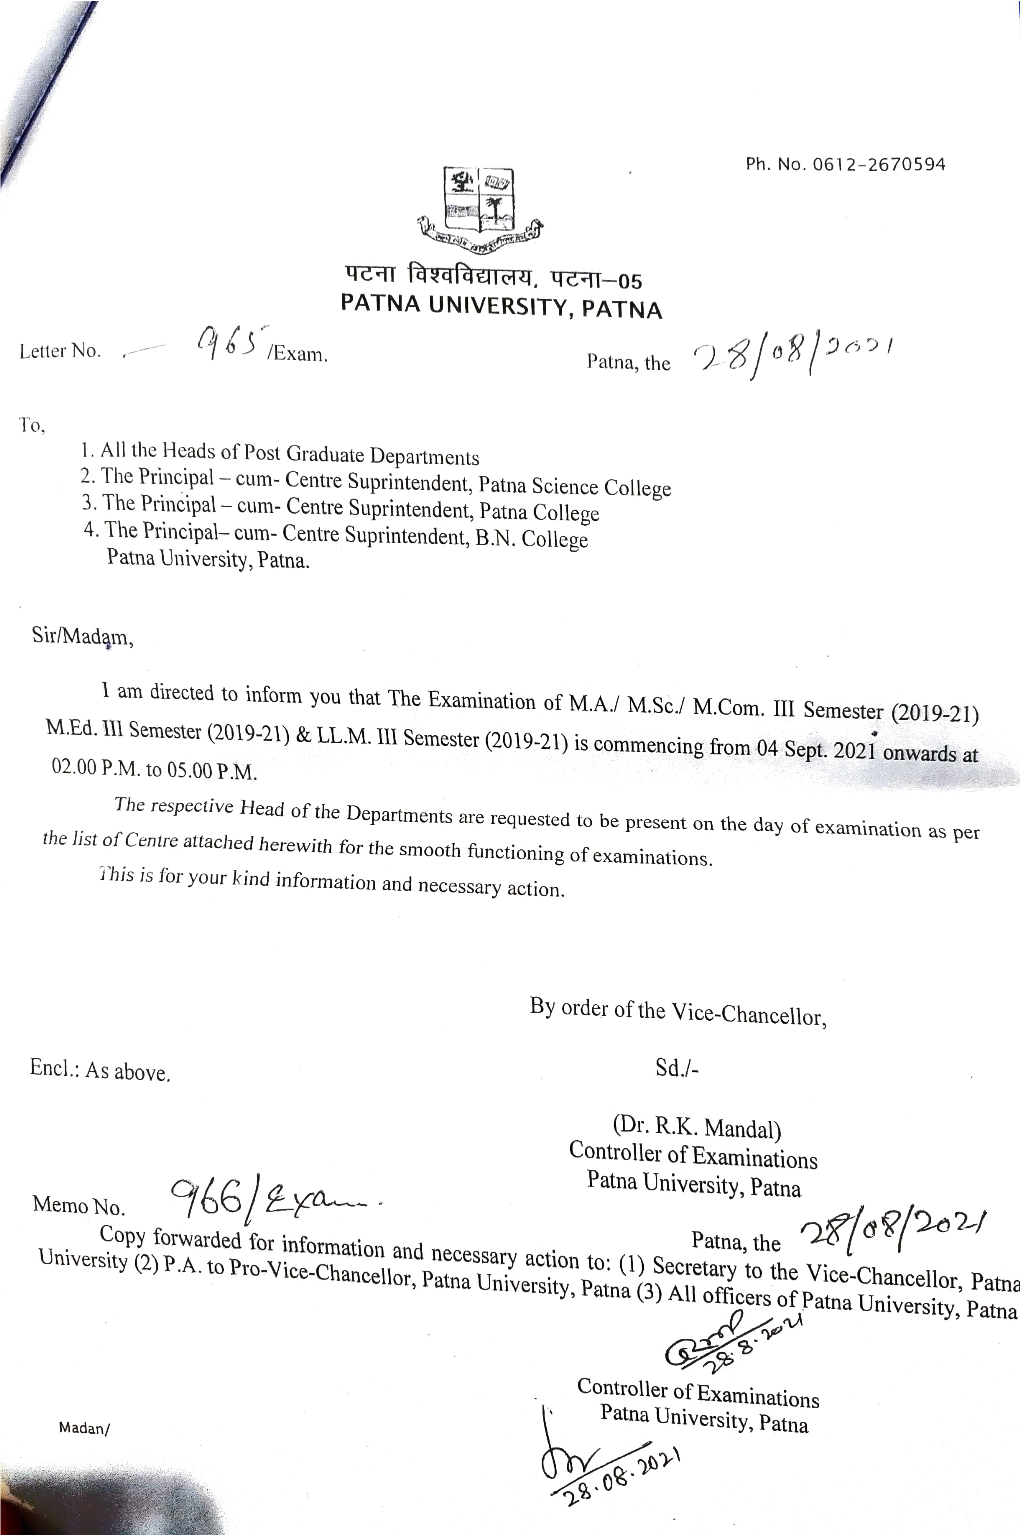 966/Exa Patna, the 2/8/02/ Copy Forwarded for Information and University (2) P.A